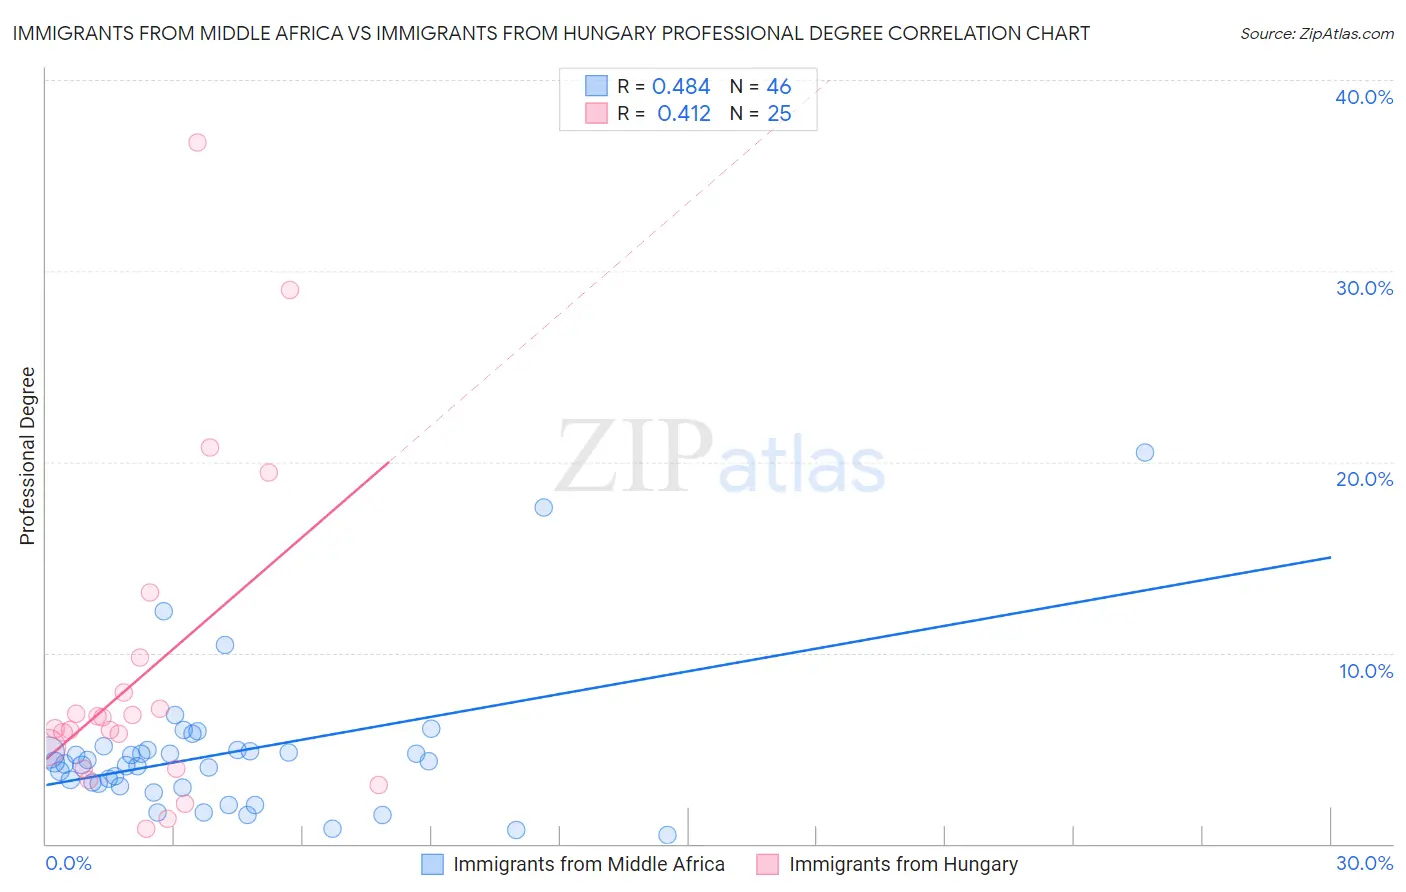 Immigrants from Middle Africa vs Immigrants from Hungary Professional Degree